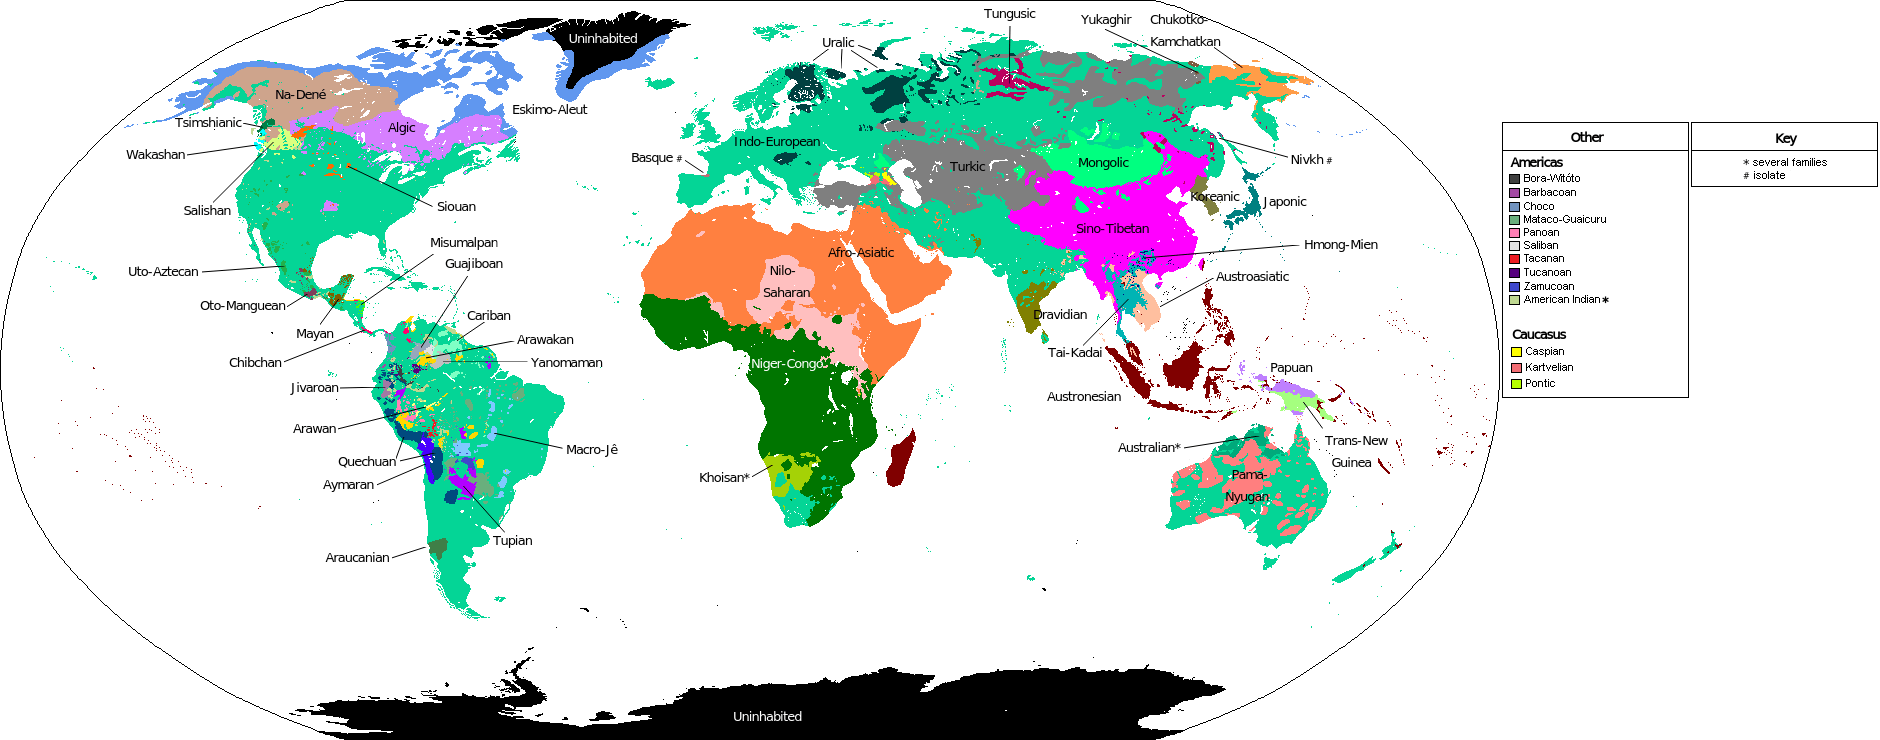 language families in the world